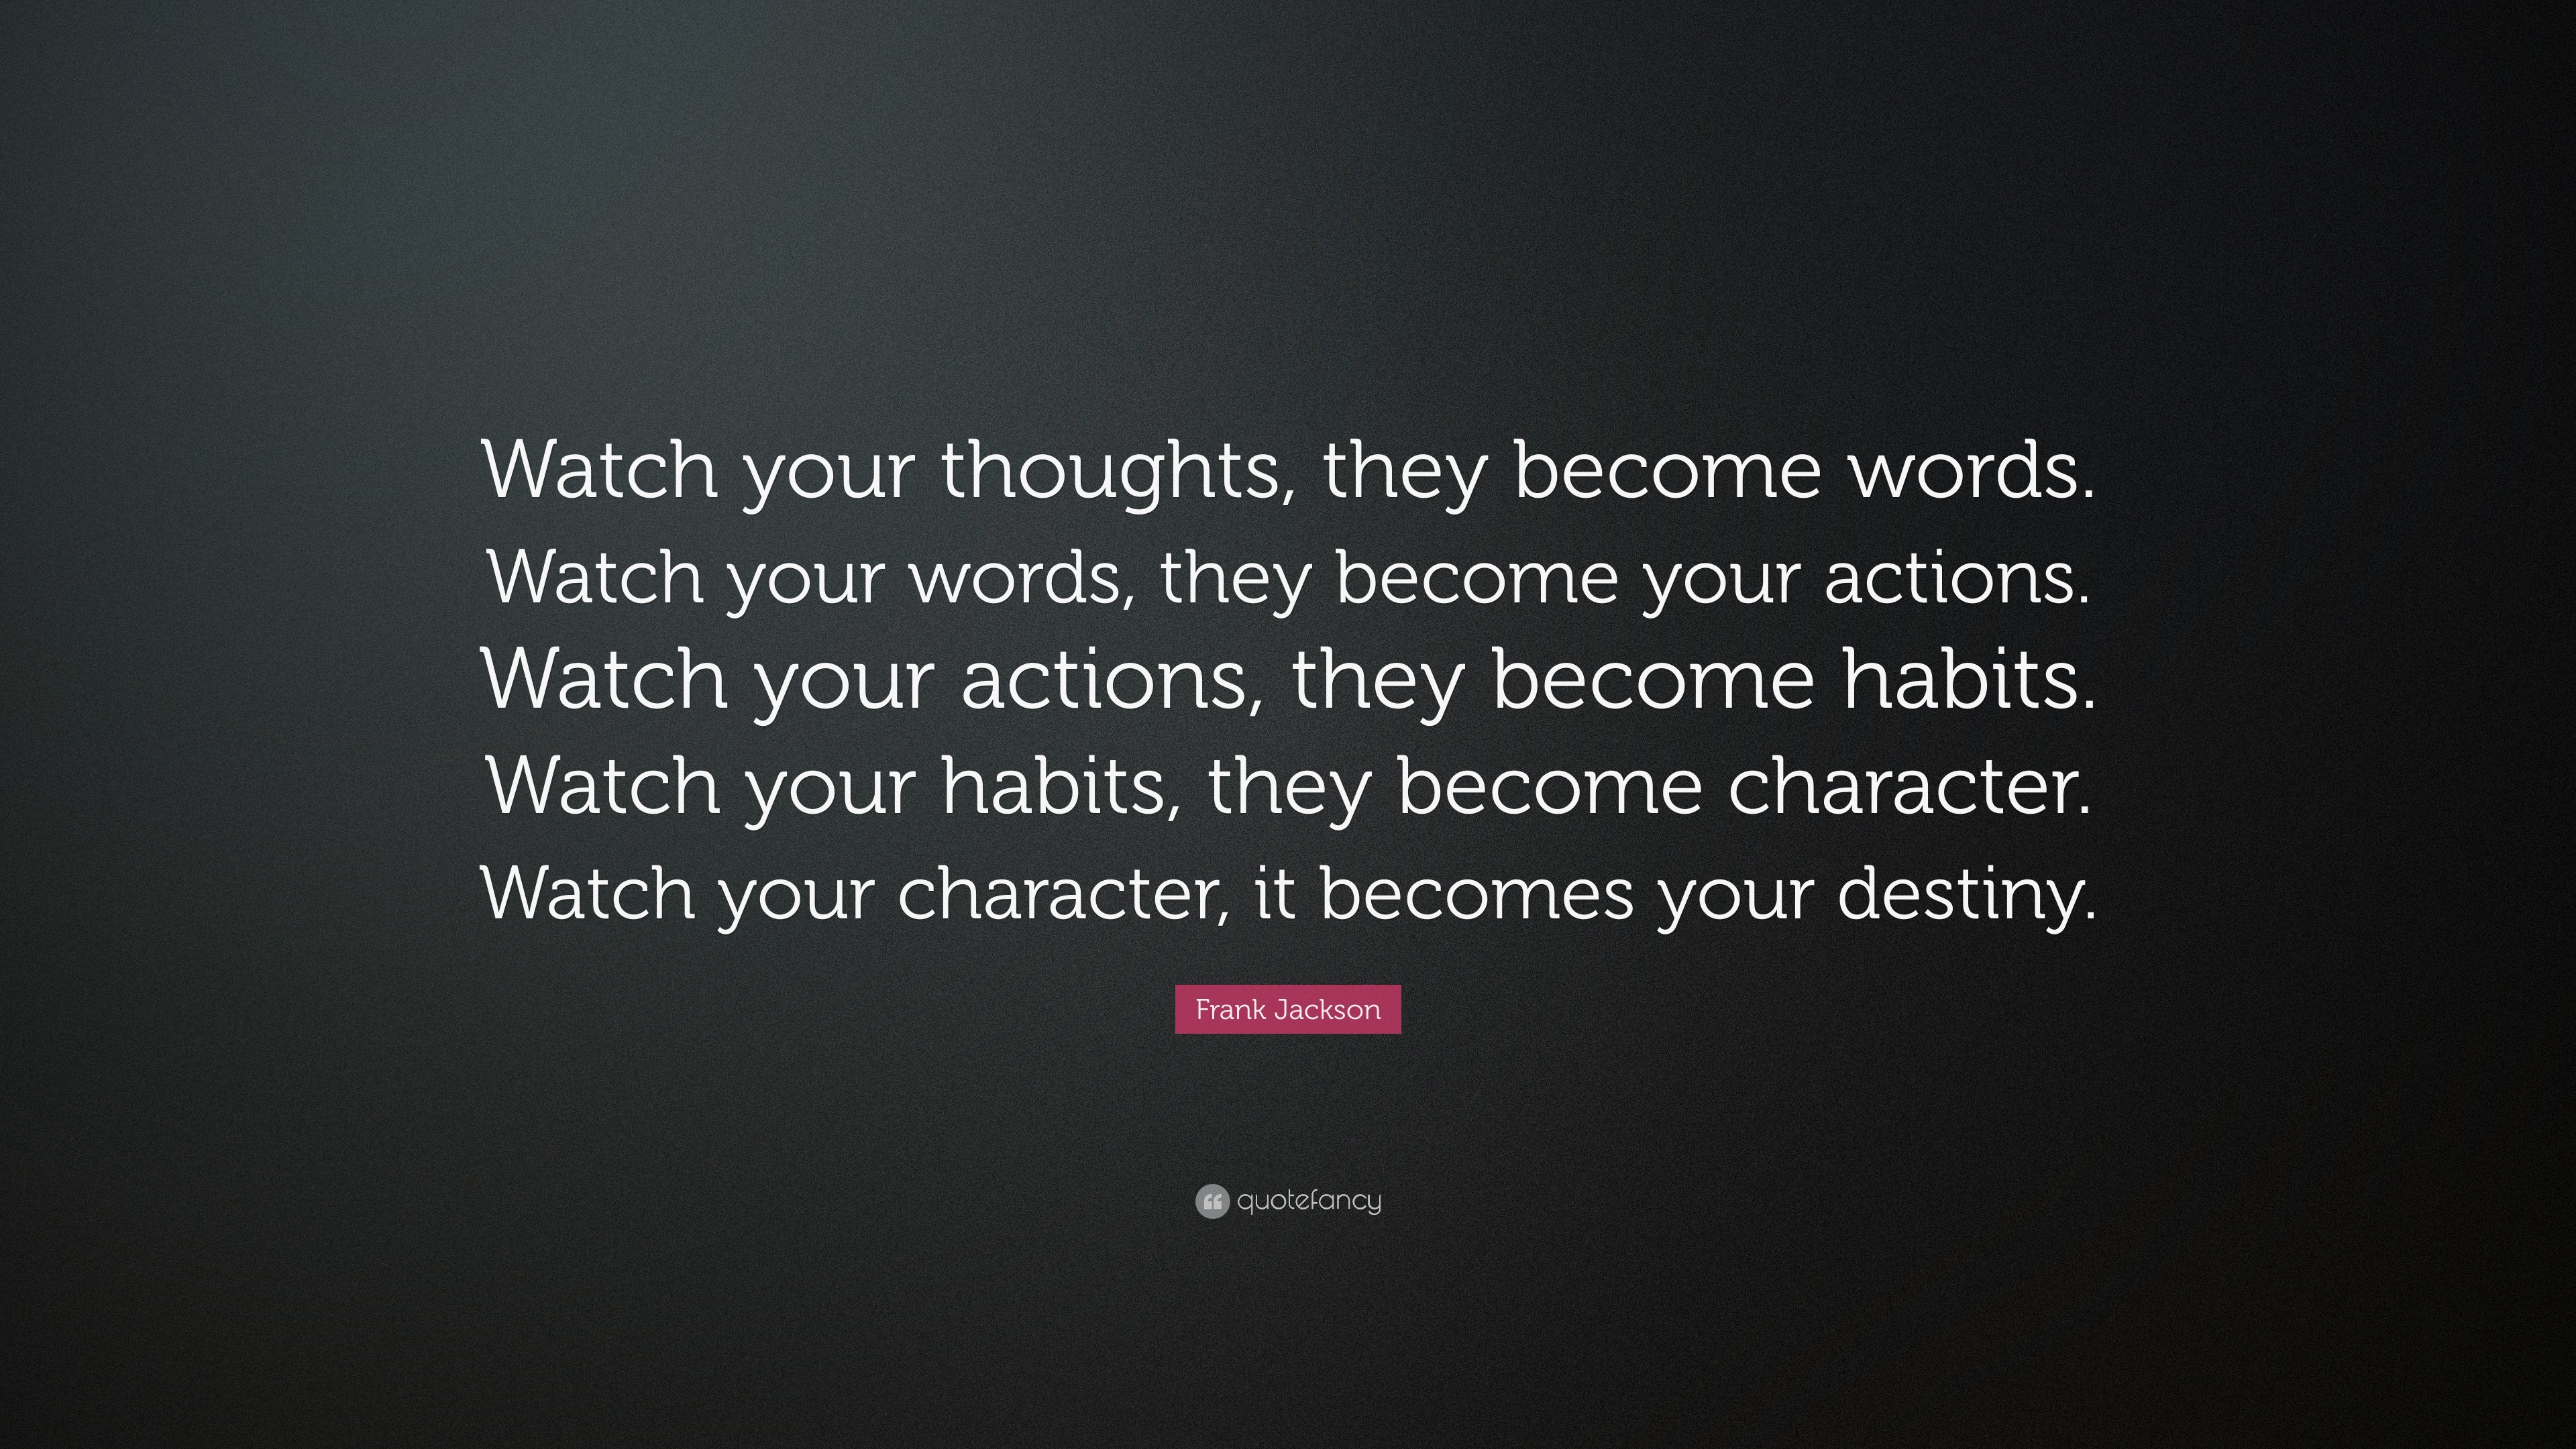 watch your thoughts they become words 1600x900